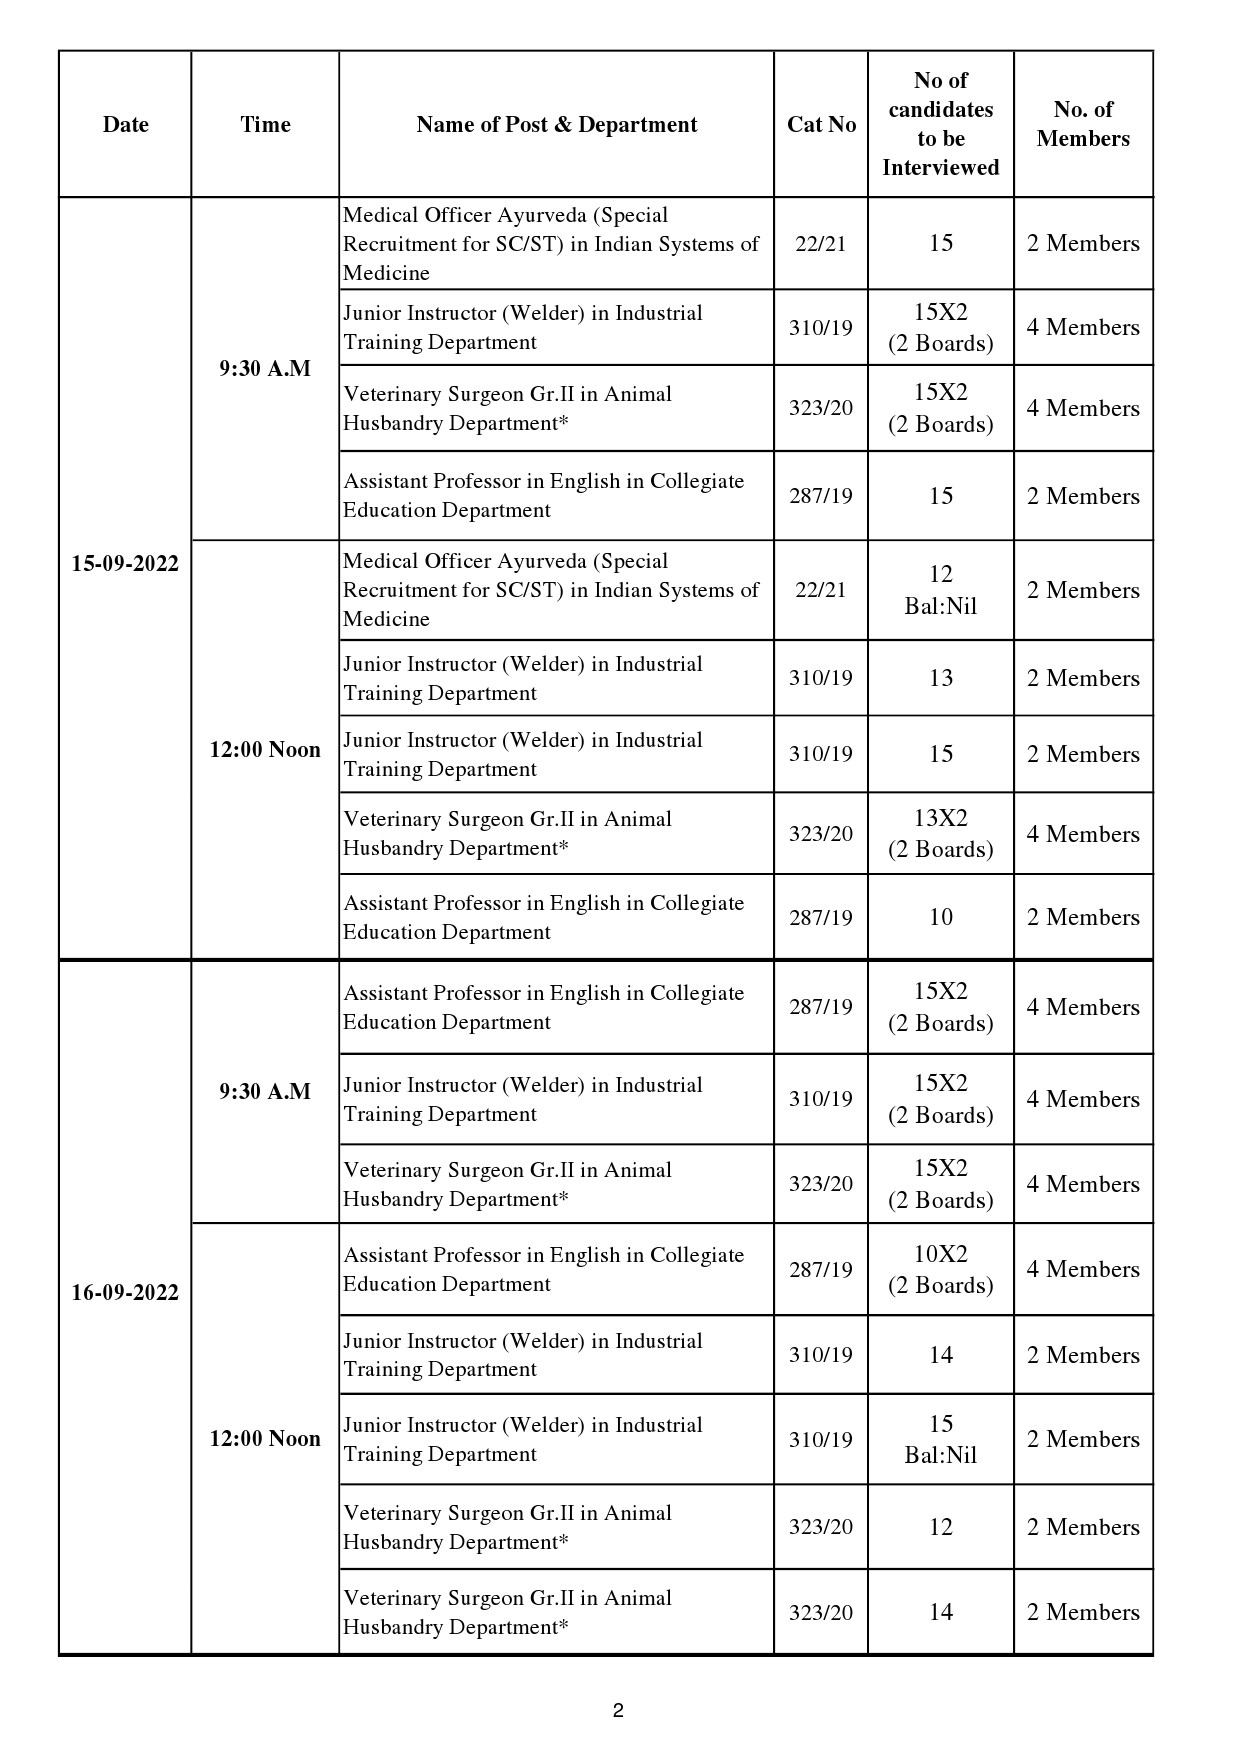 Interview Programme For The Month Of September 2022 - Notification Image 2